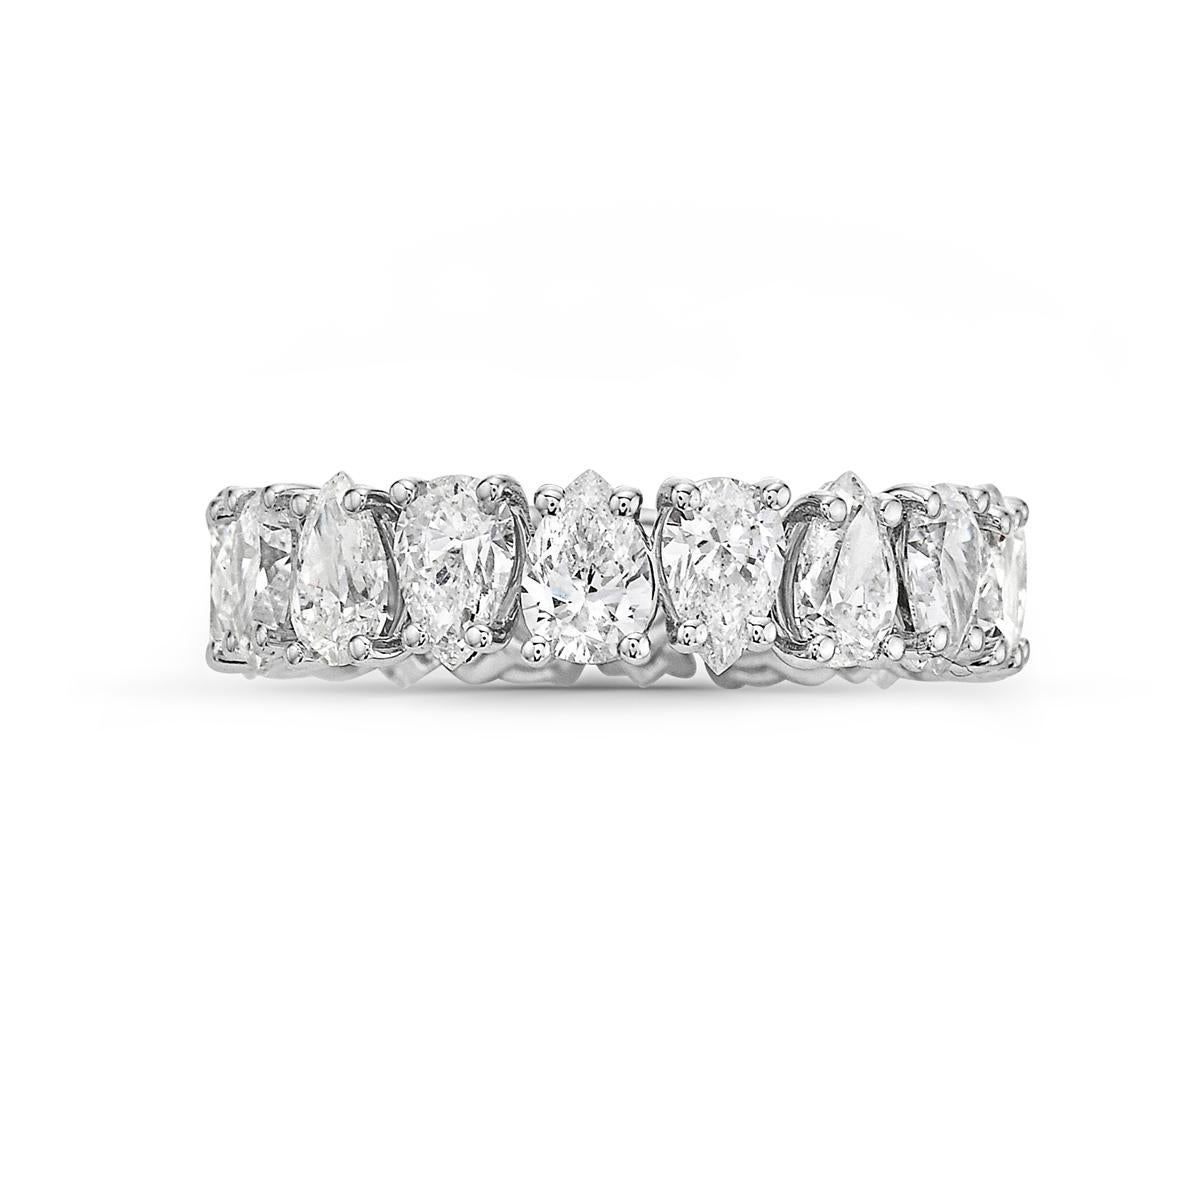 This diamond eternity band features 18 pear shape F VVS diamonds weighing approximately 4.30 carats set in 18k white gold. Size 6. 